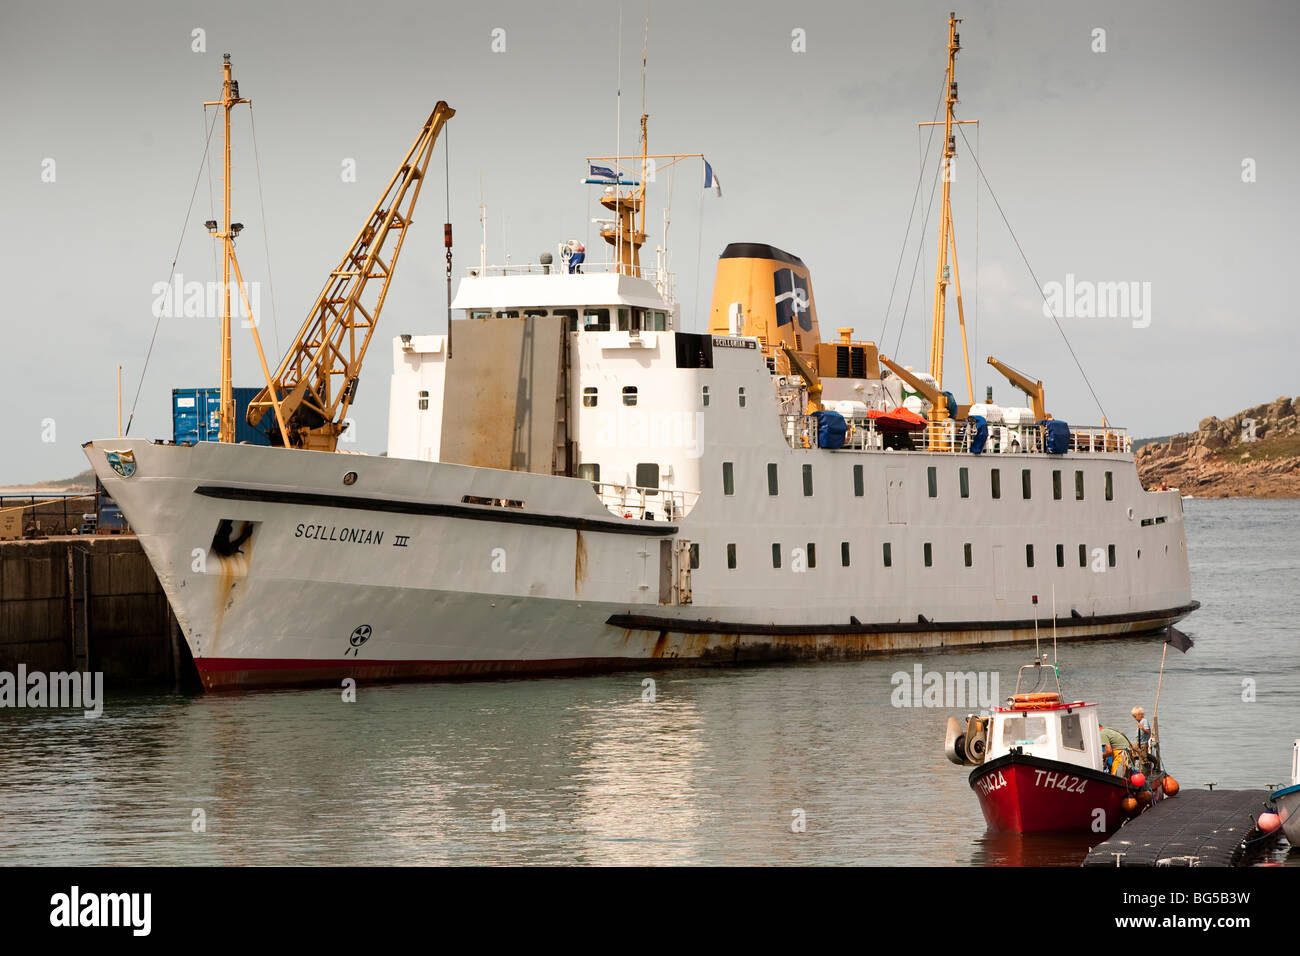 Scillonian III moored in St Mary's Harbour Isles of Scilly Stock Photo